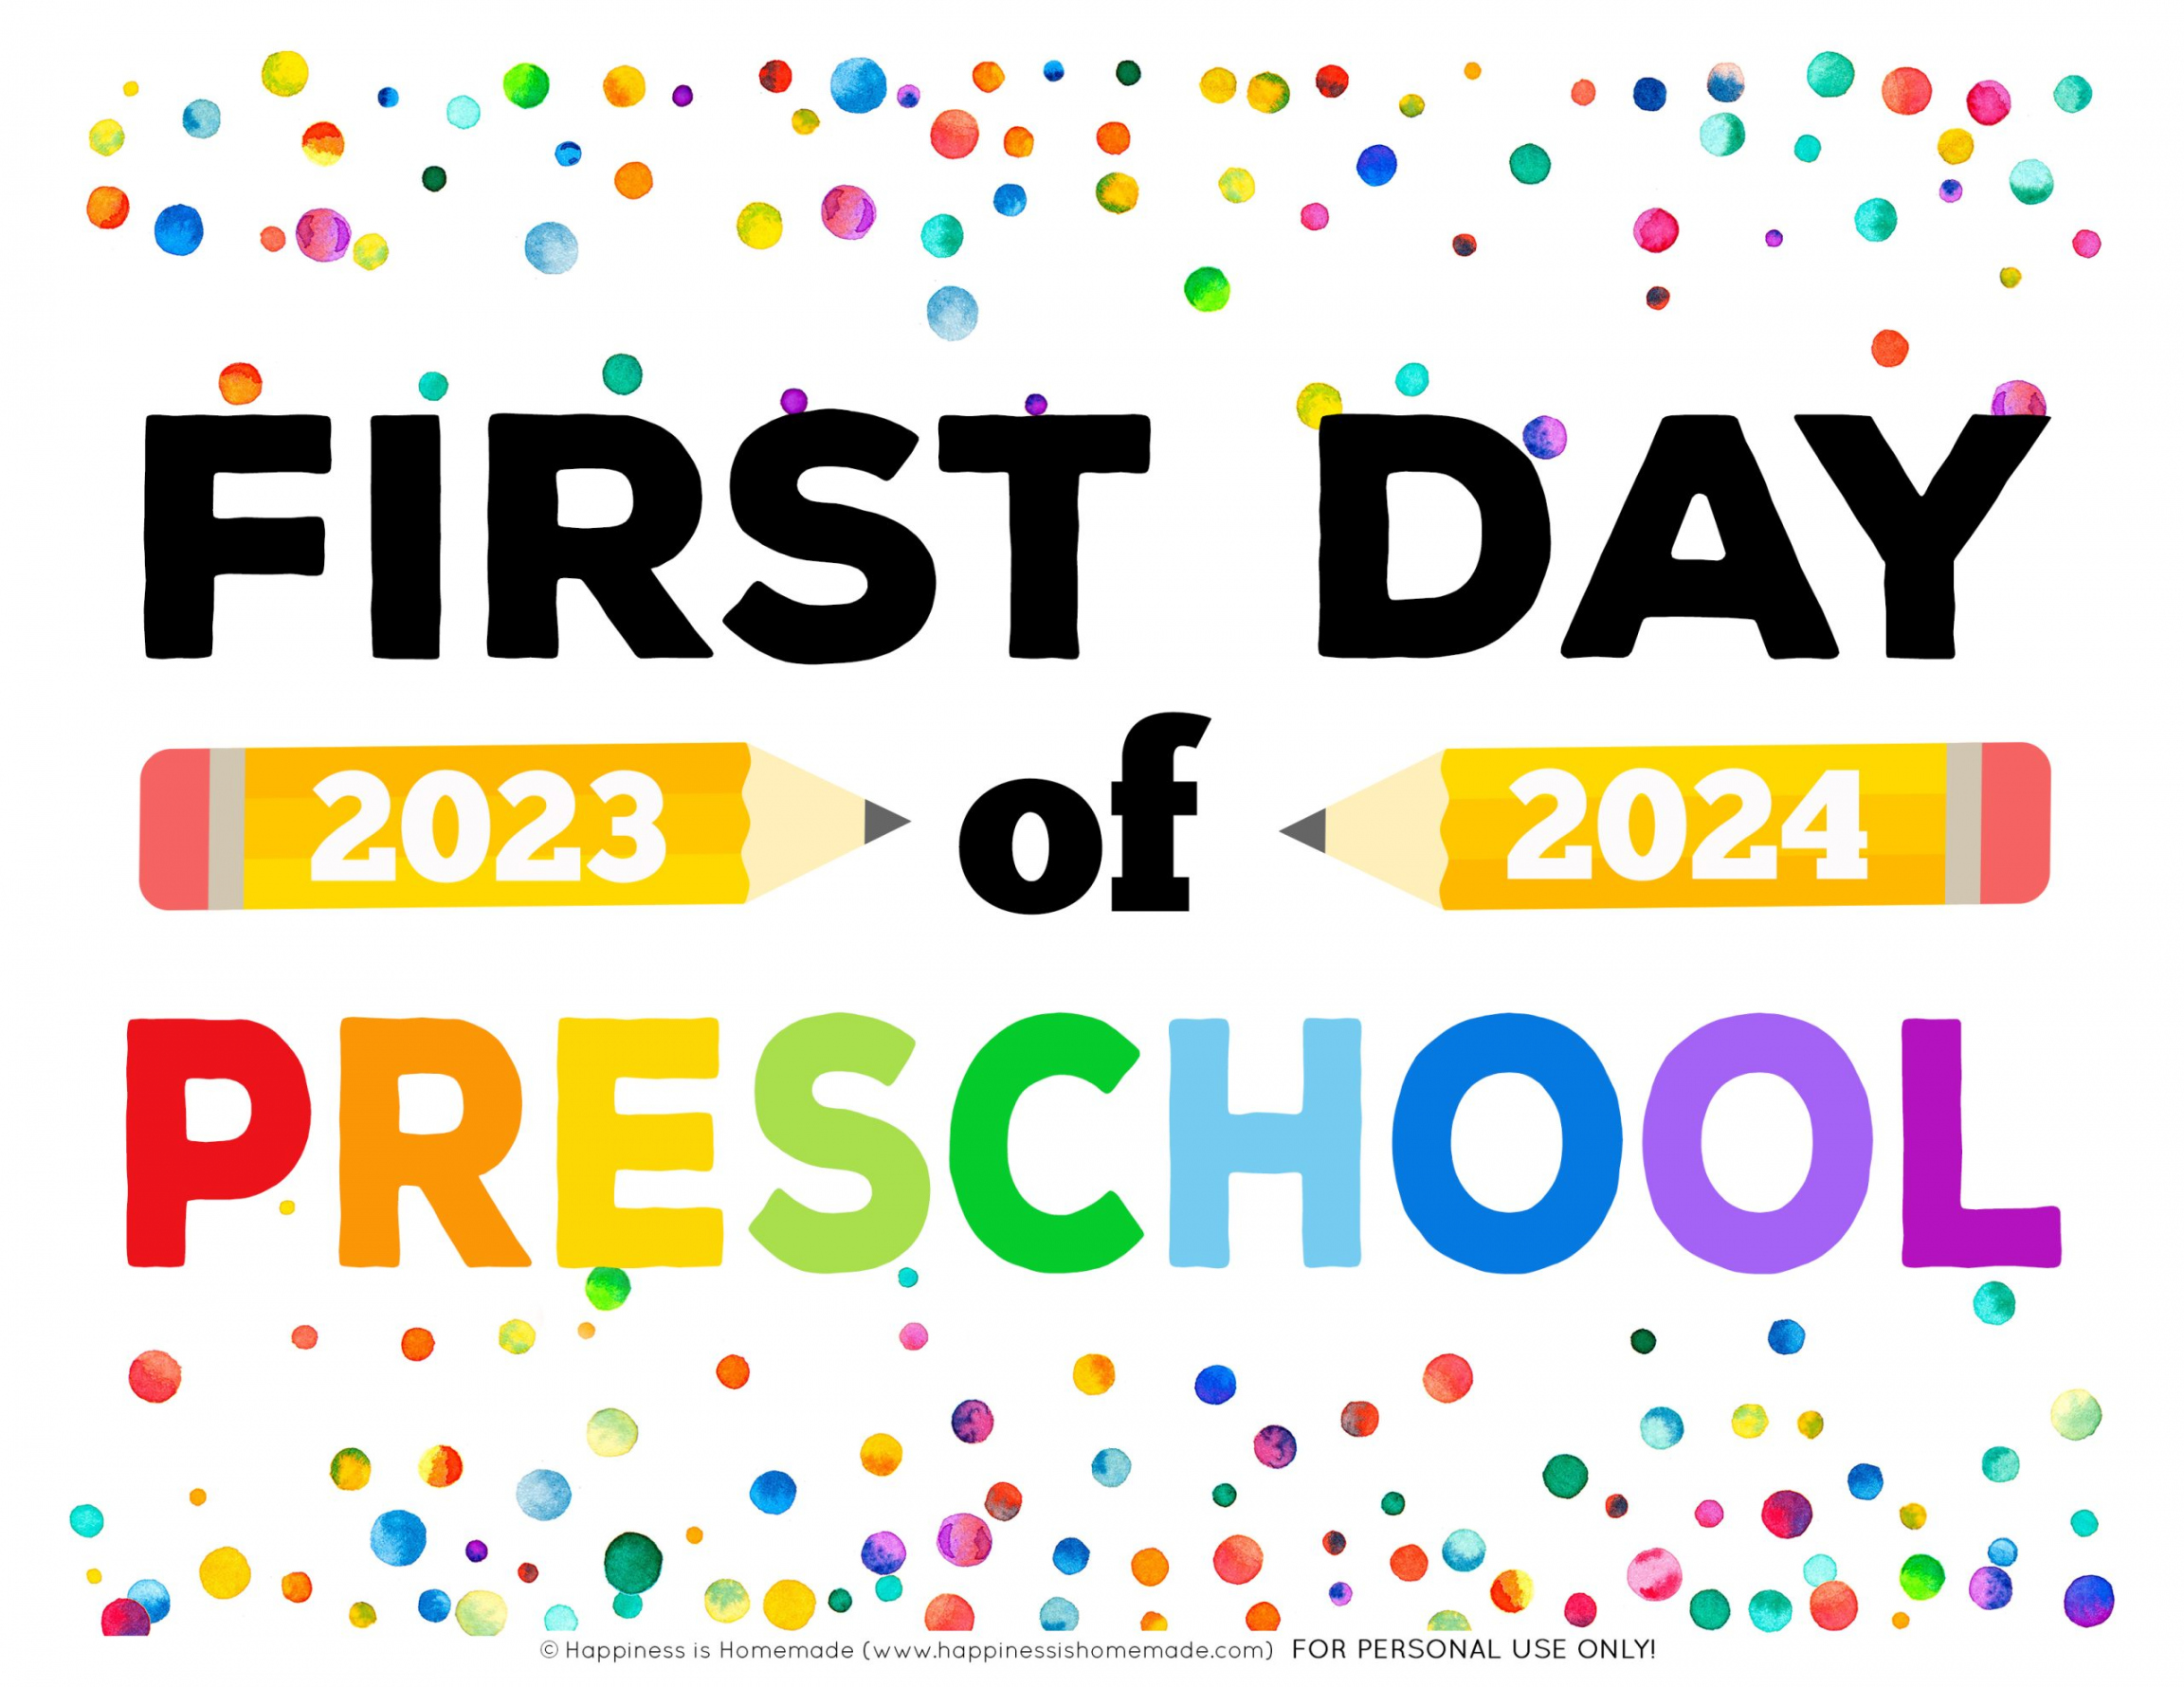 Free Printable First Day of School Signs - - Happiness is  - FREE Printables - Free Printable First Day Of Preschool Sign